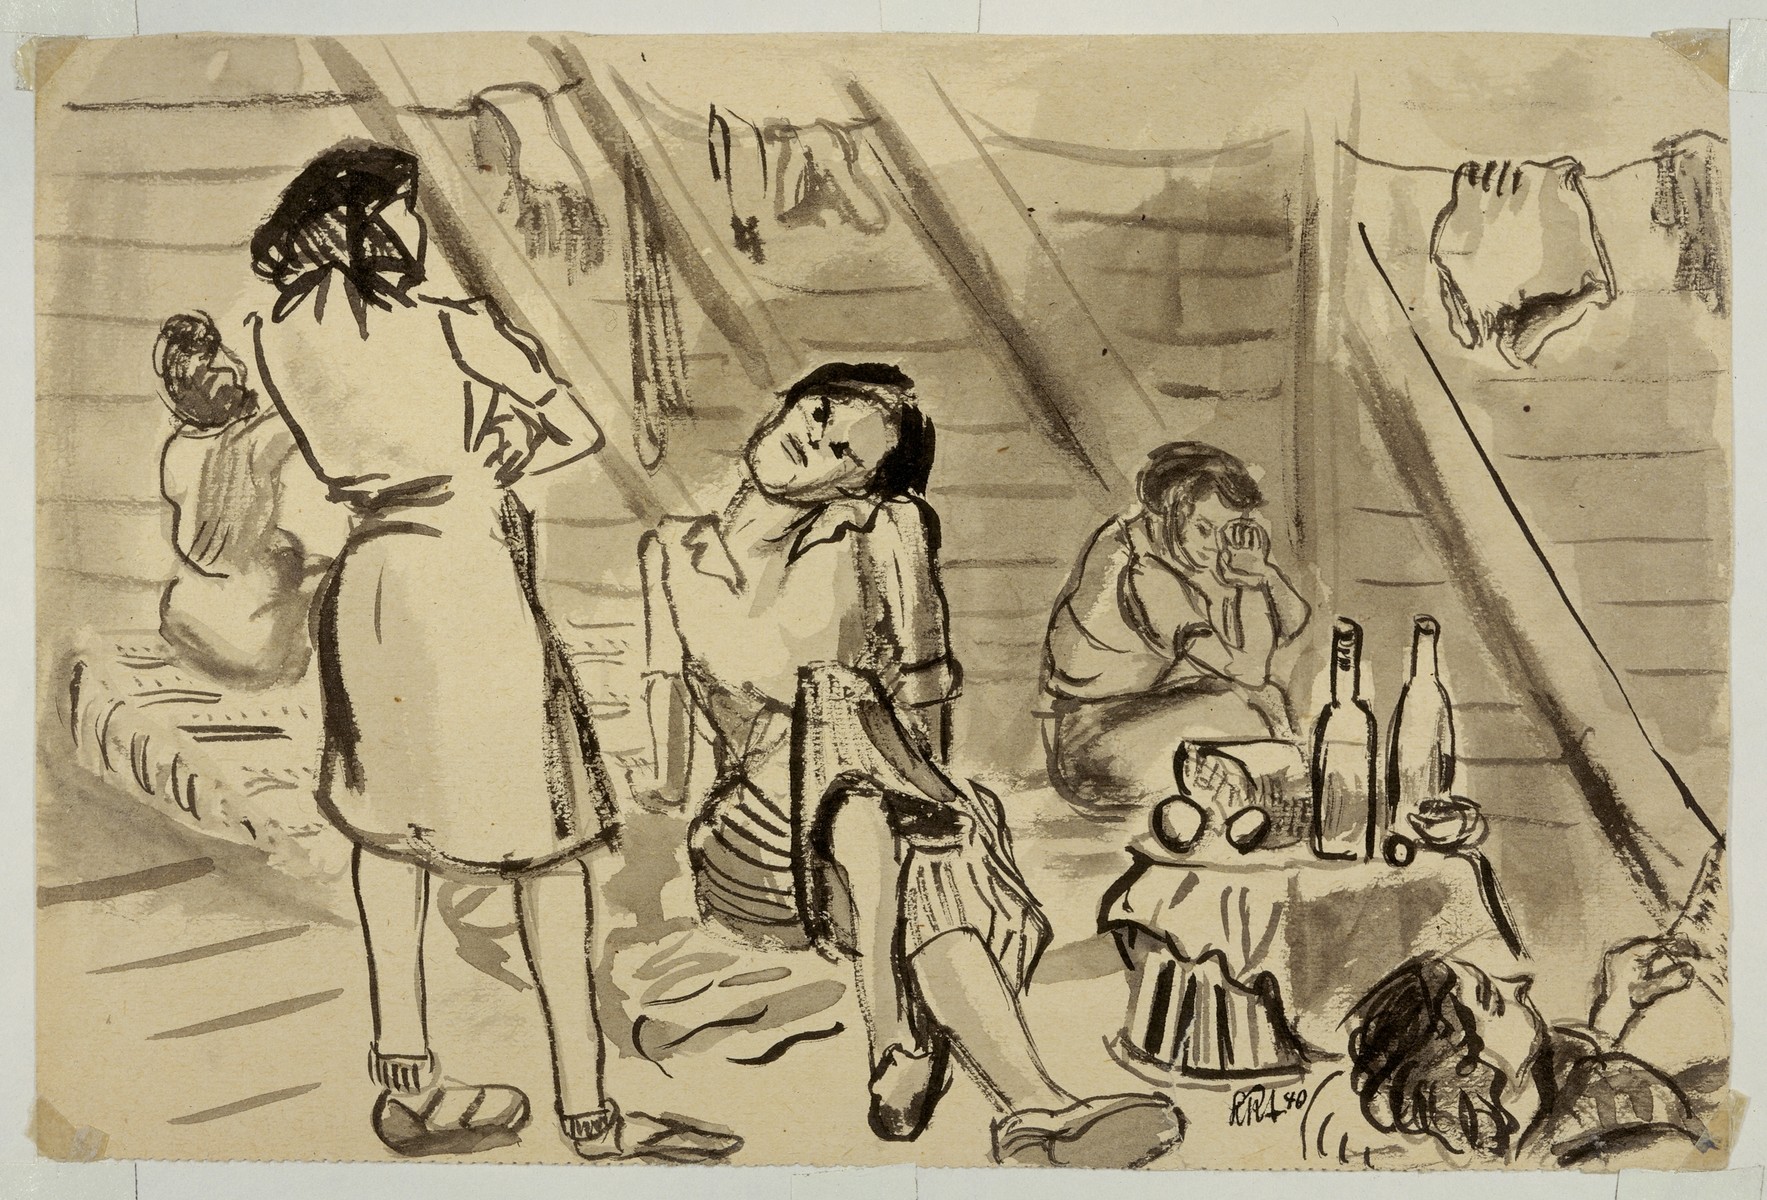 Sketch of a women's barracks in Gurs by Lili Andrieux.